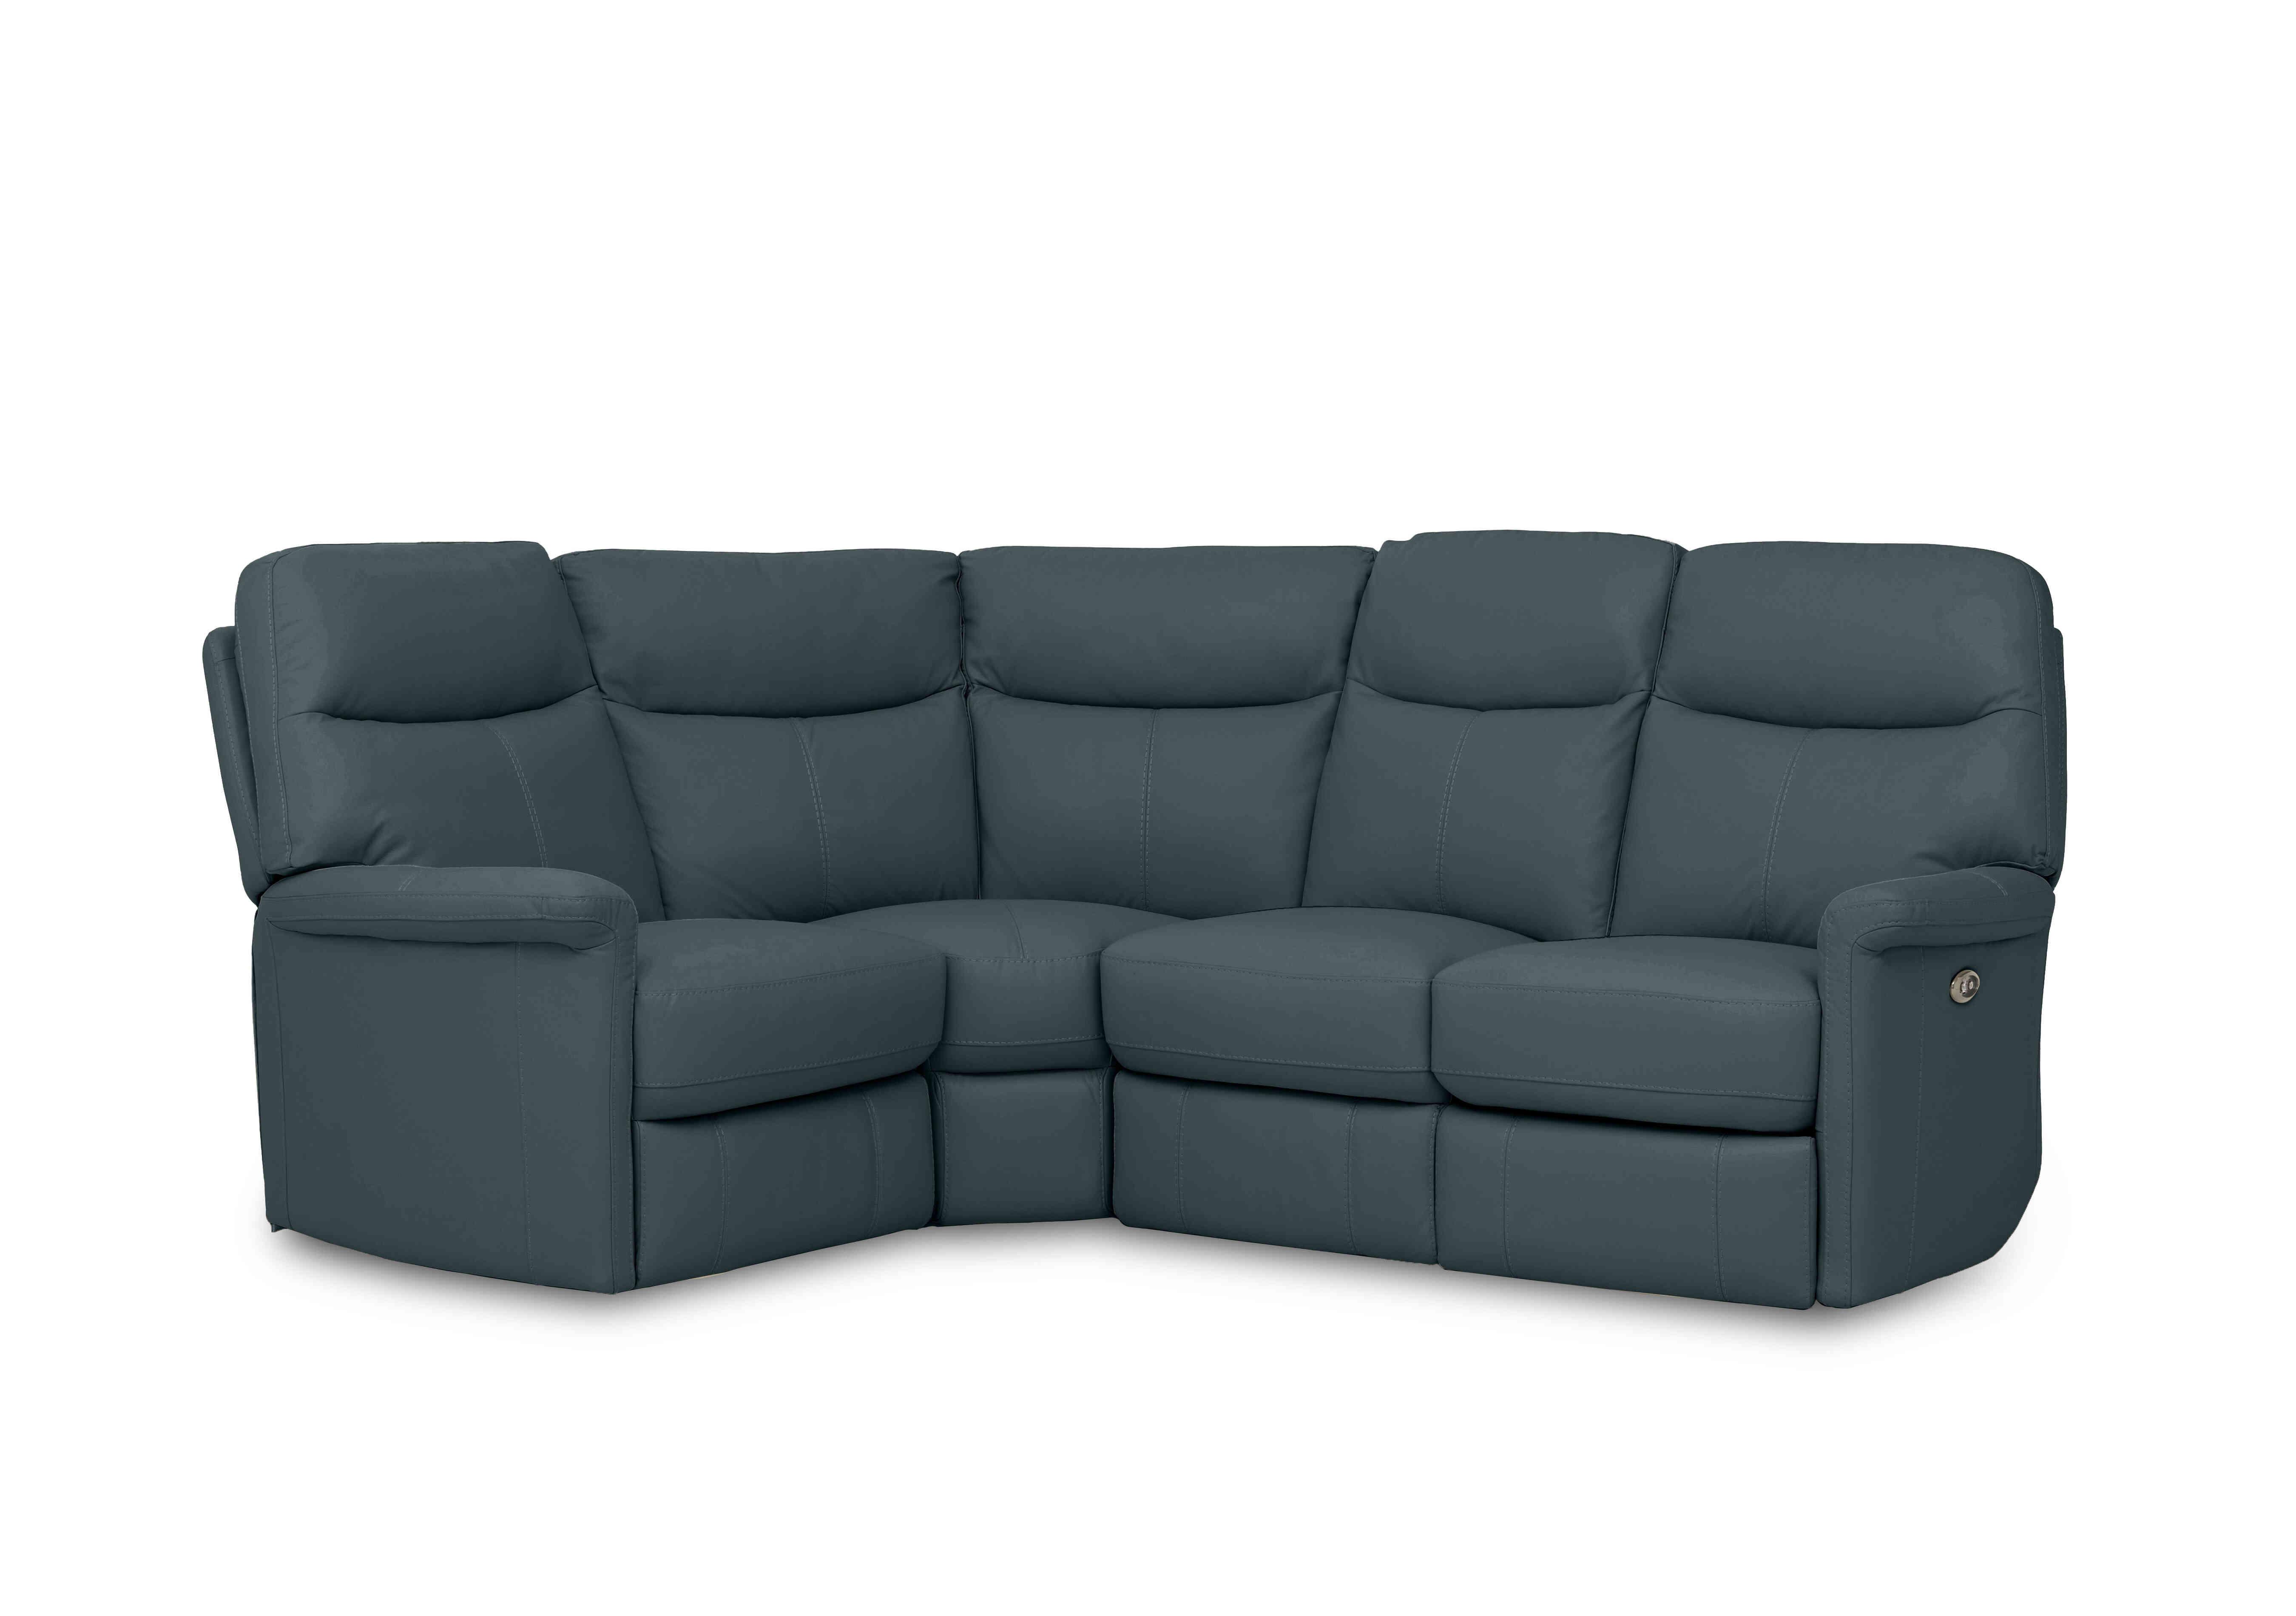 Compact Collection Lille Leather Corner Sofa in Bv-301e Lake Green on Furniture Village